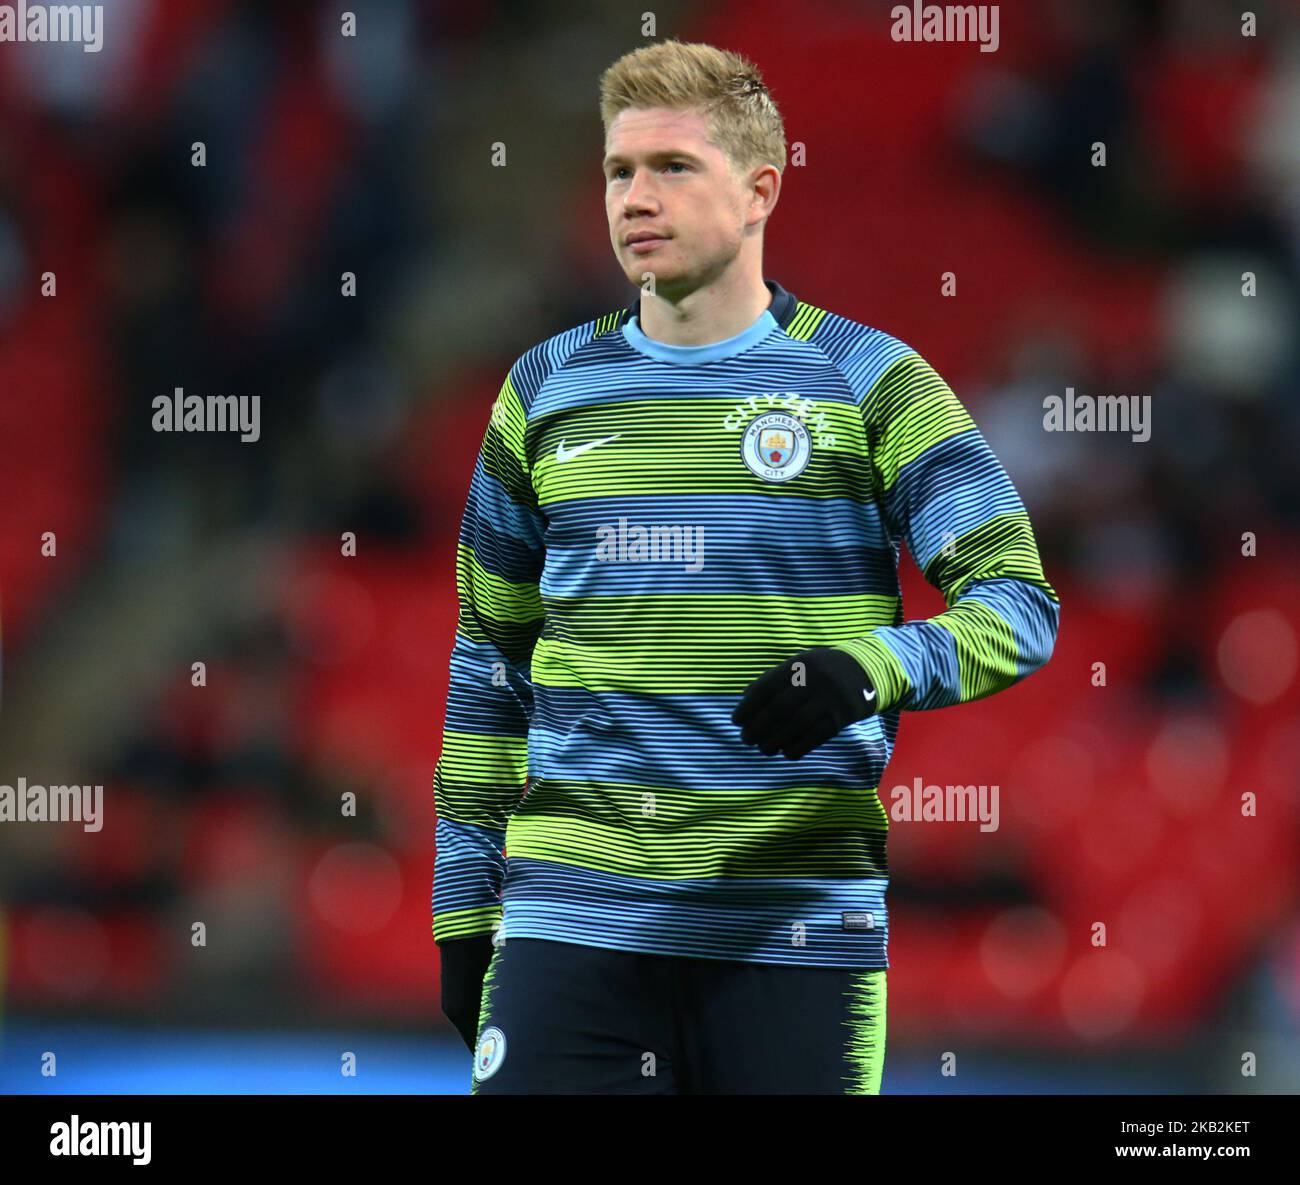 London, England - October 29, 2018 Manchester City's Kevin De Bruyne during the pre-match warm-up during Premier League between Tottenham Hotspur and Manchester City at Wembley stadium , London, England on 29 Oct 2018. (Photo by Action Foto Sport/NurPhoto)  Stock Photo